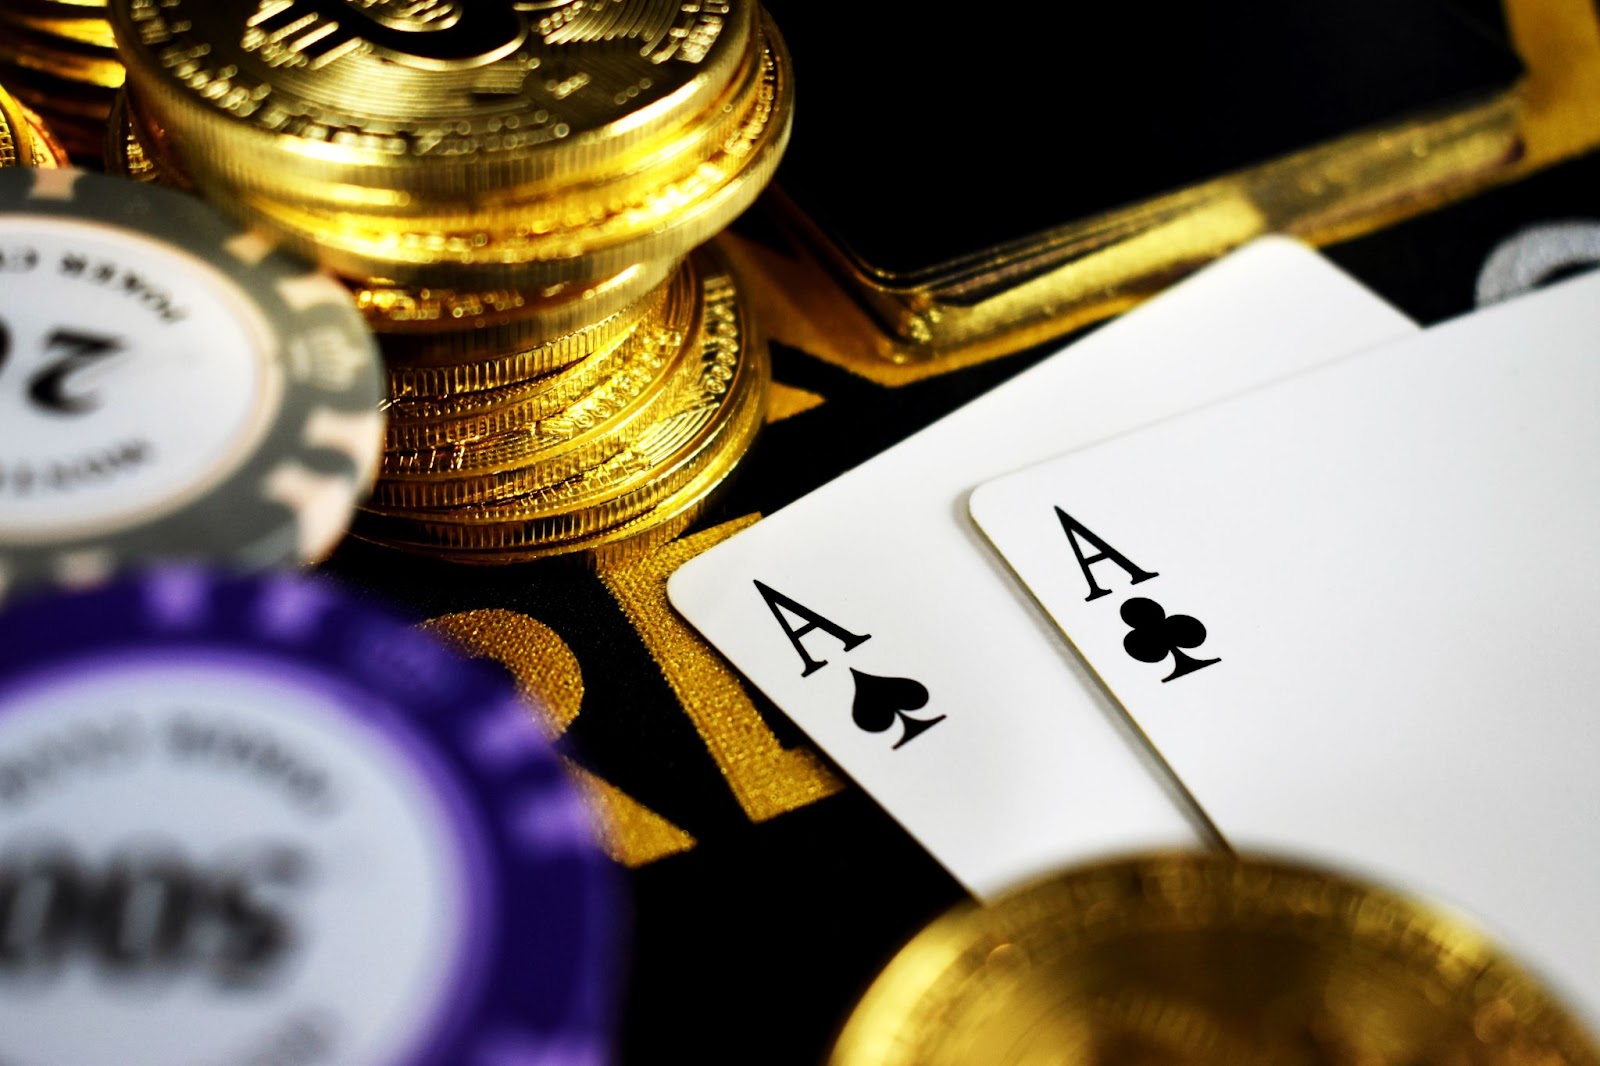 Best Make best crypto casino You Will Read This Year